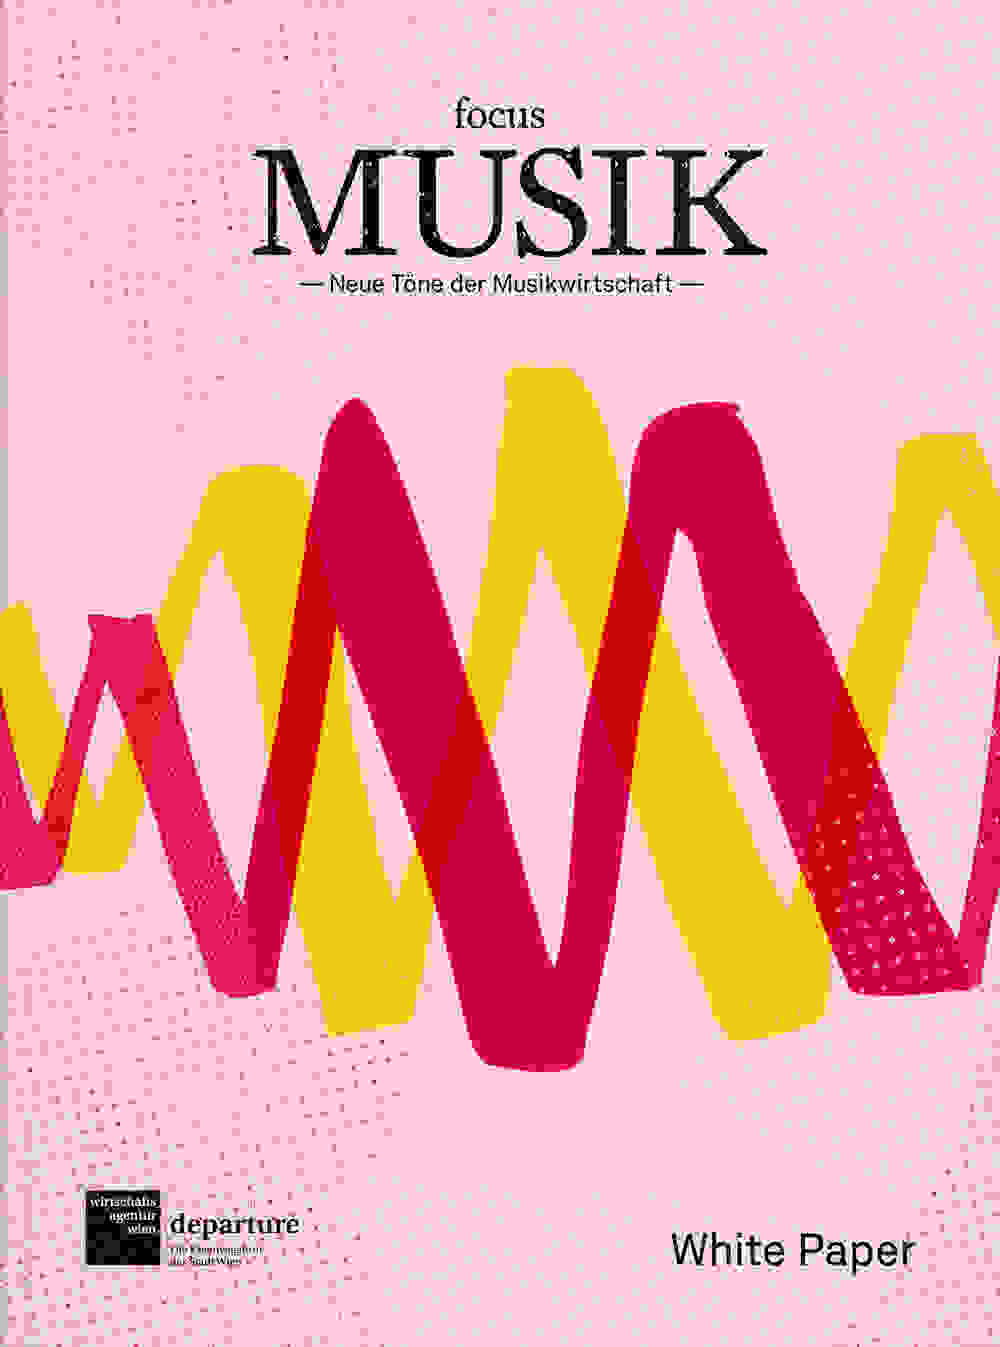 Dummy Softcover departure WP Musik